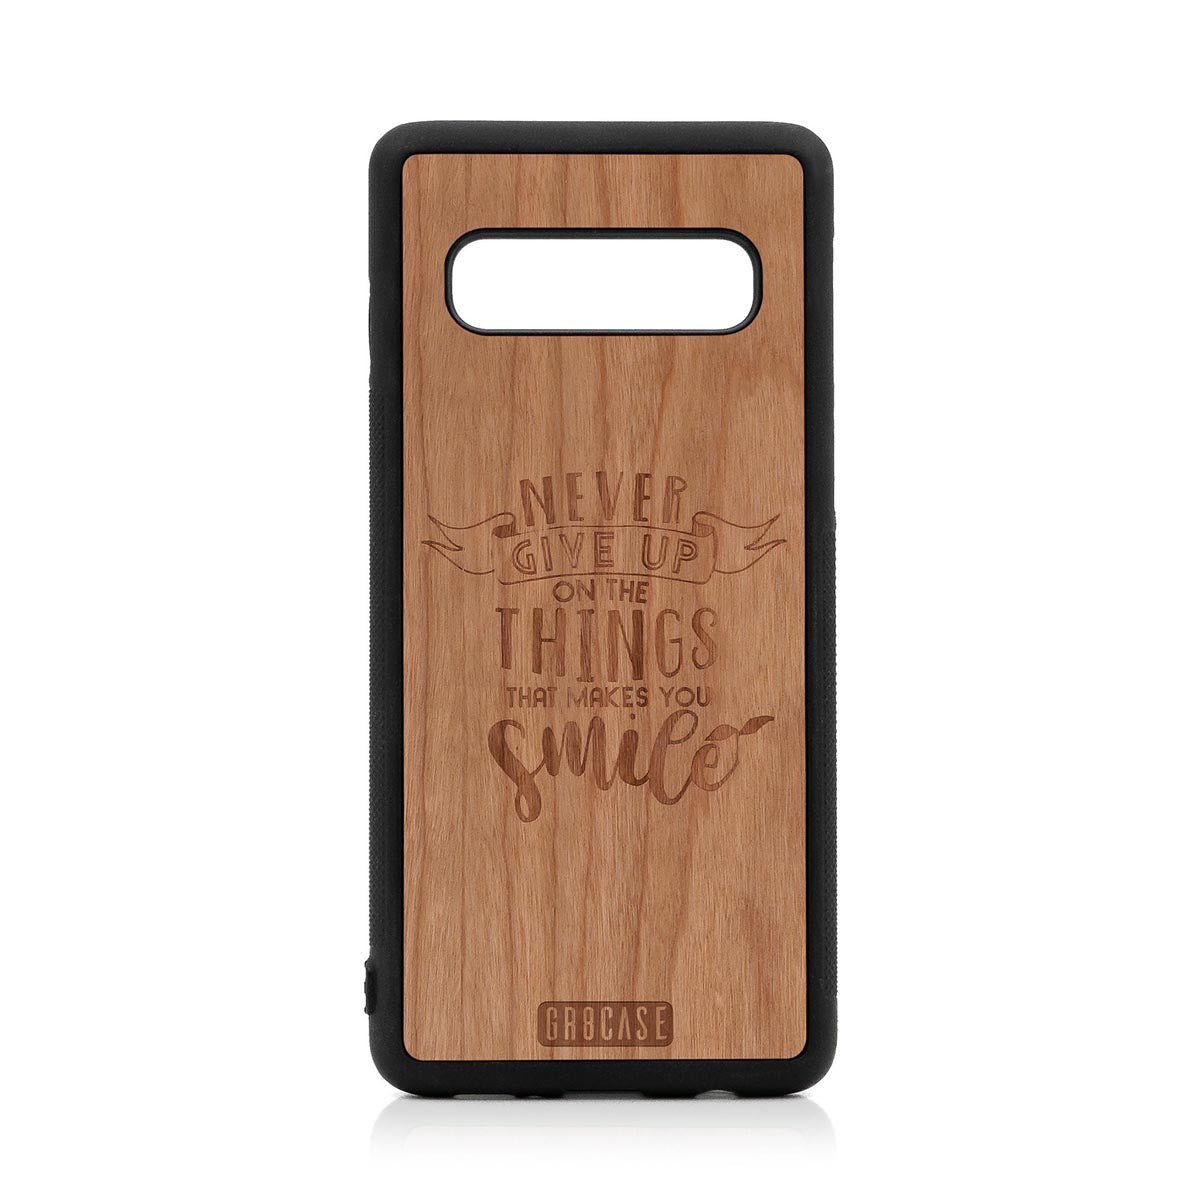 Never Give Up On The Things That Makes You Smile Design Wood Case For Samsung Galaxy S10 by GR8CASE